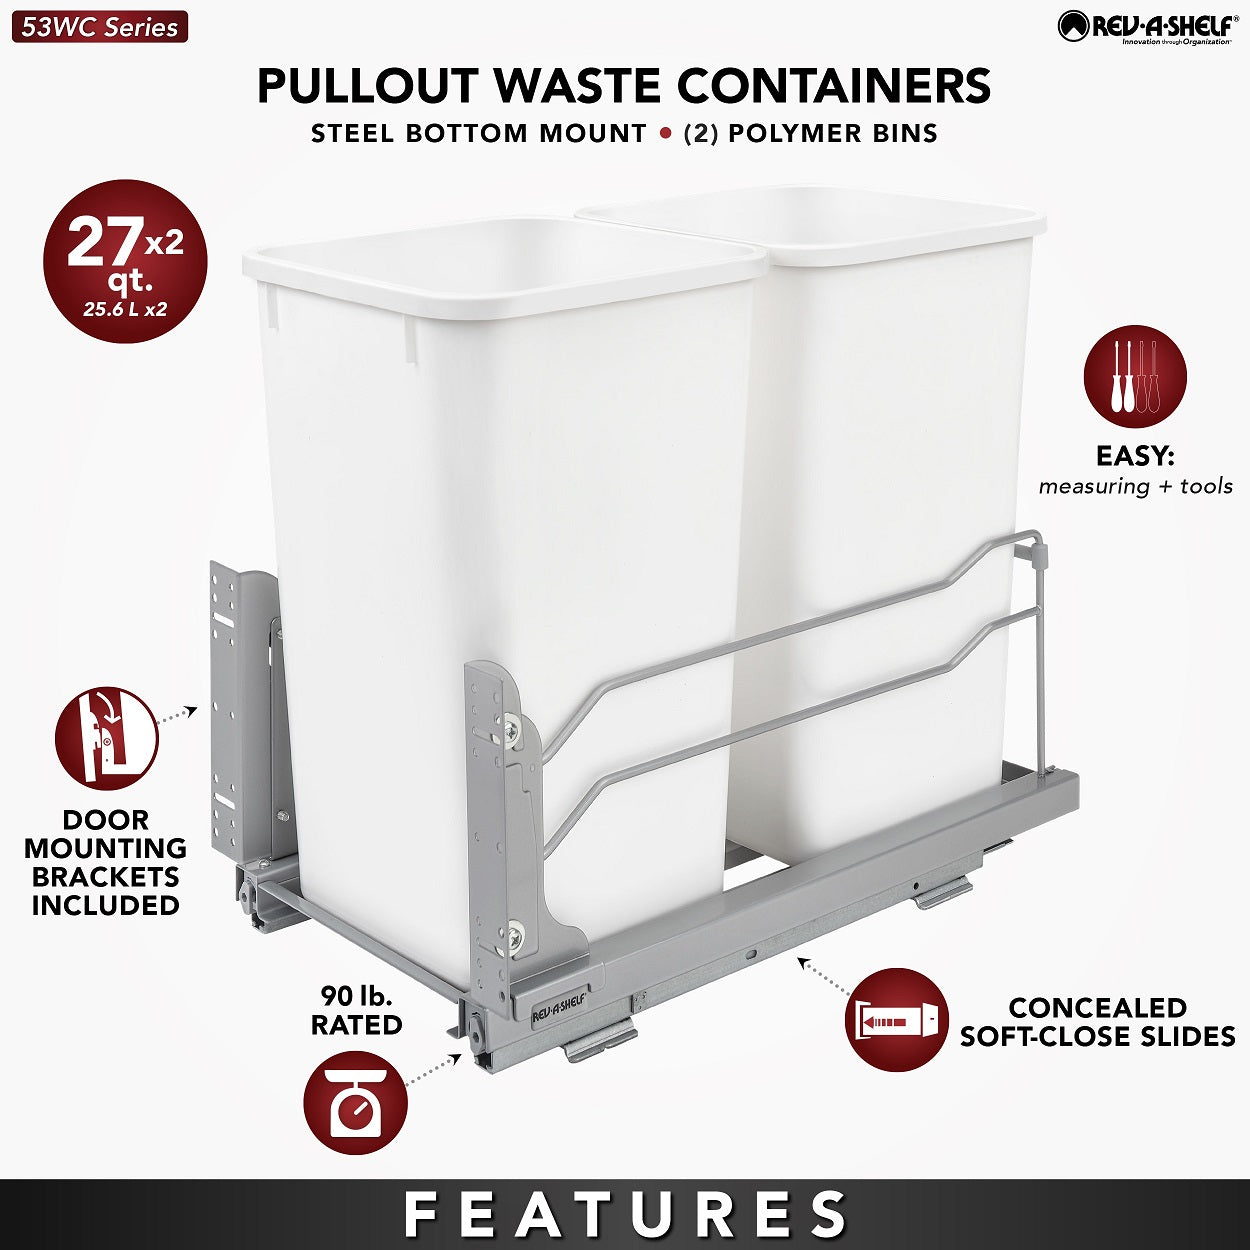 Rev-A-Shelf Double 27 Quart Pull-Out Waste Container Soft-Close 53WC-1527SCDM-212